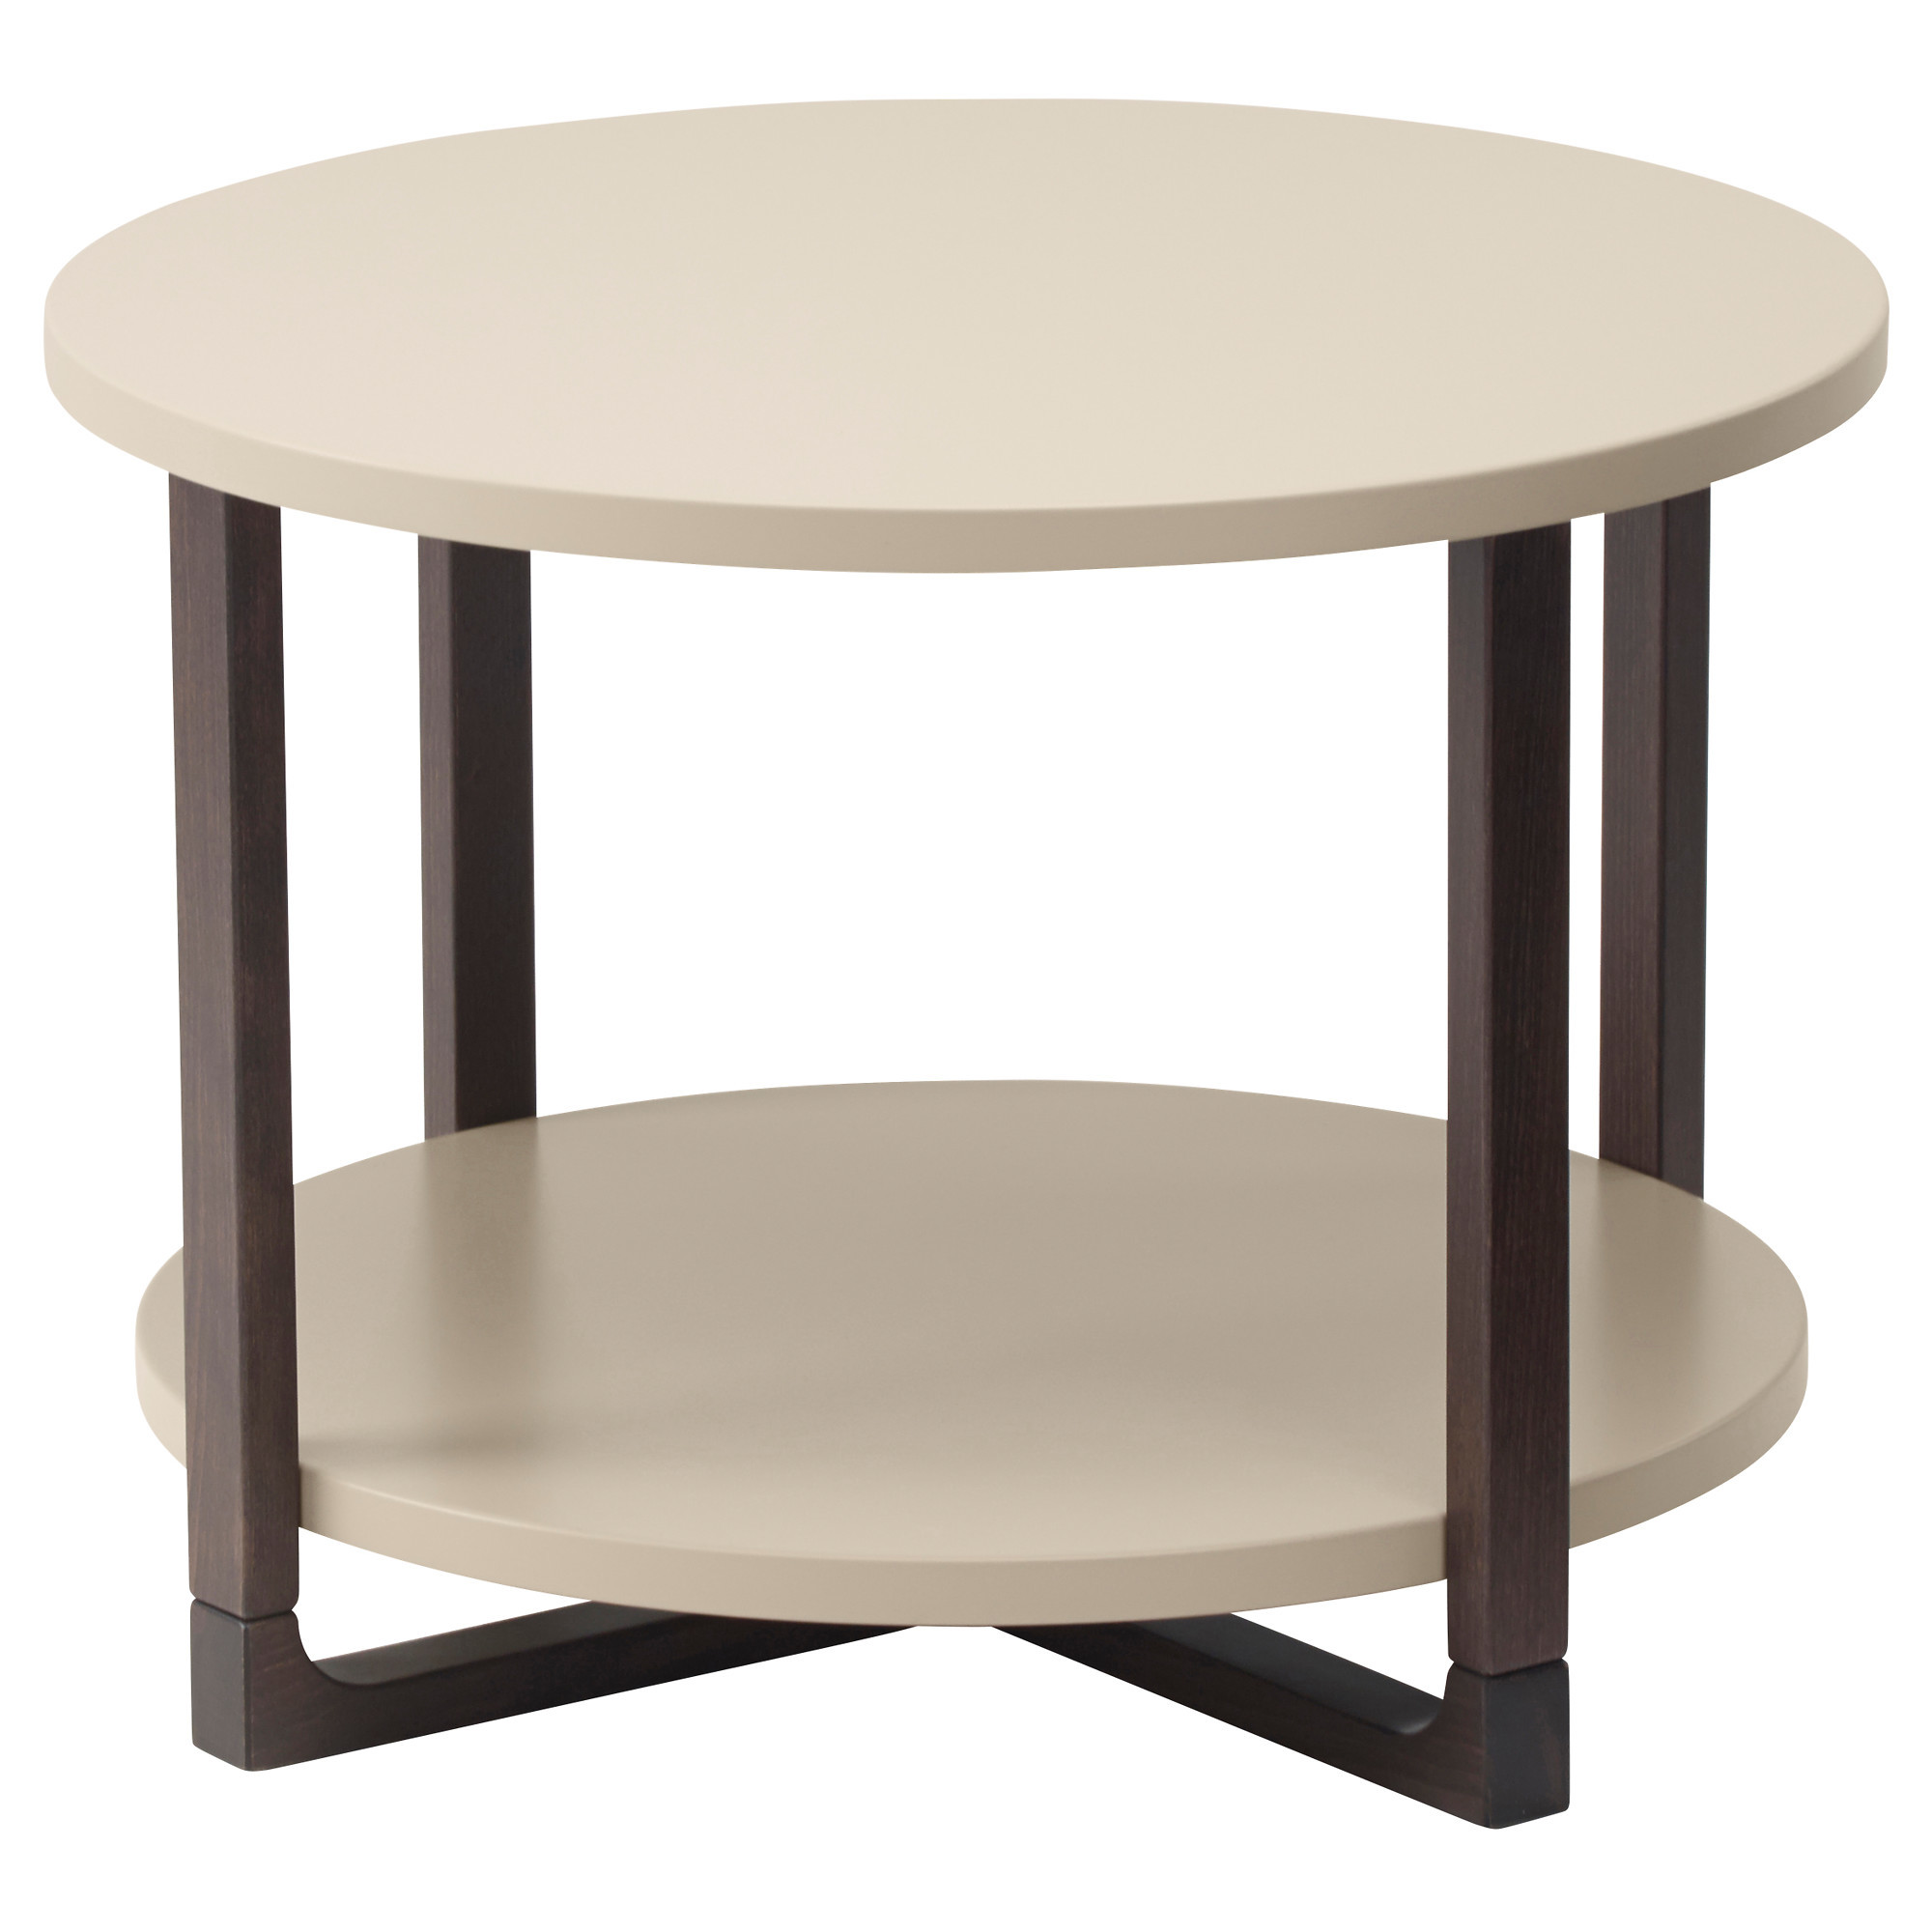 2000x2000 Unique Ikea Glass Side Table 51 About Remodel Best Interior Design with  Ikea Glass Side Table